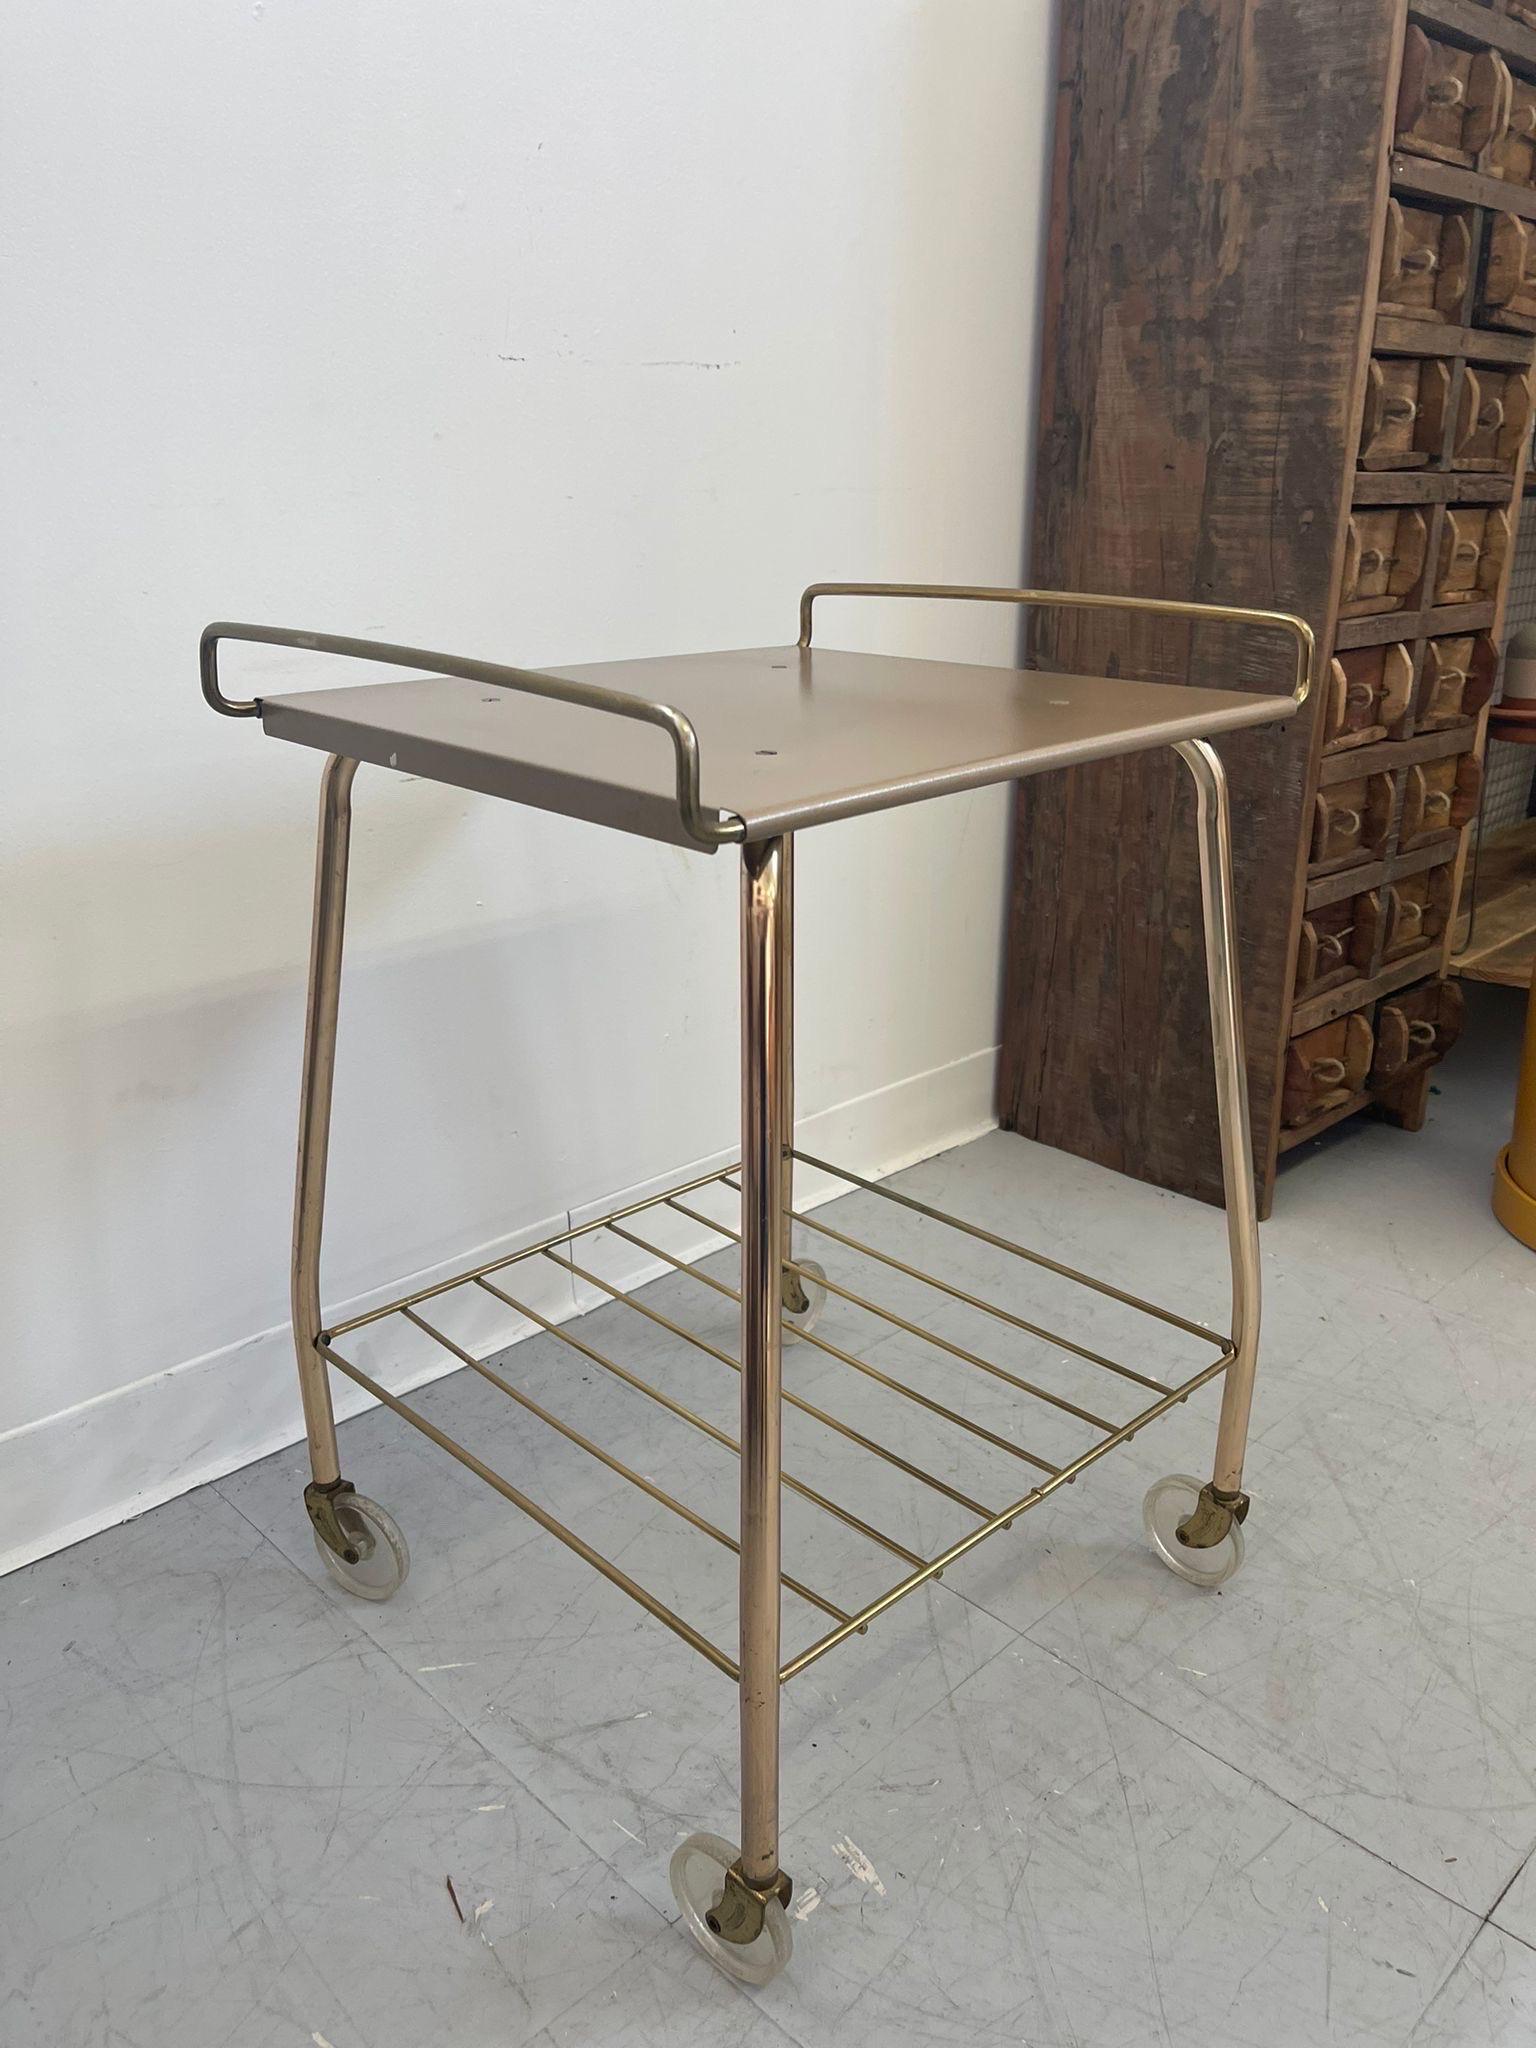 Vintage Cart 2 Tier with Rack on bottom. Clear Wheels. Vintage Condition Consistent with Age 

Dimensions. 18 W ; 16 D ; 24 H